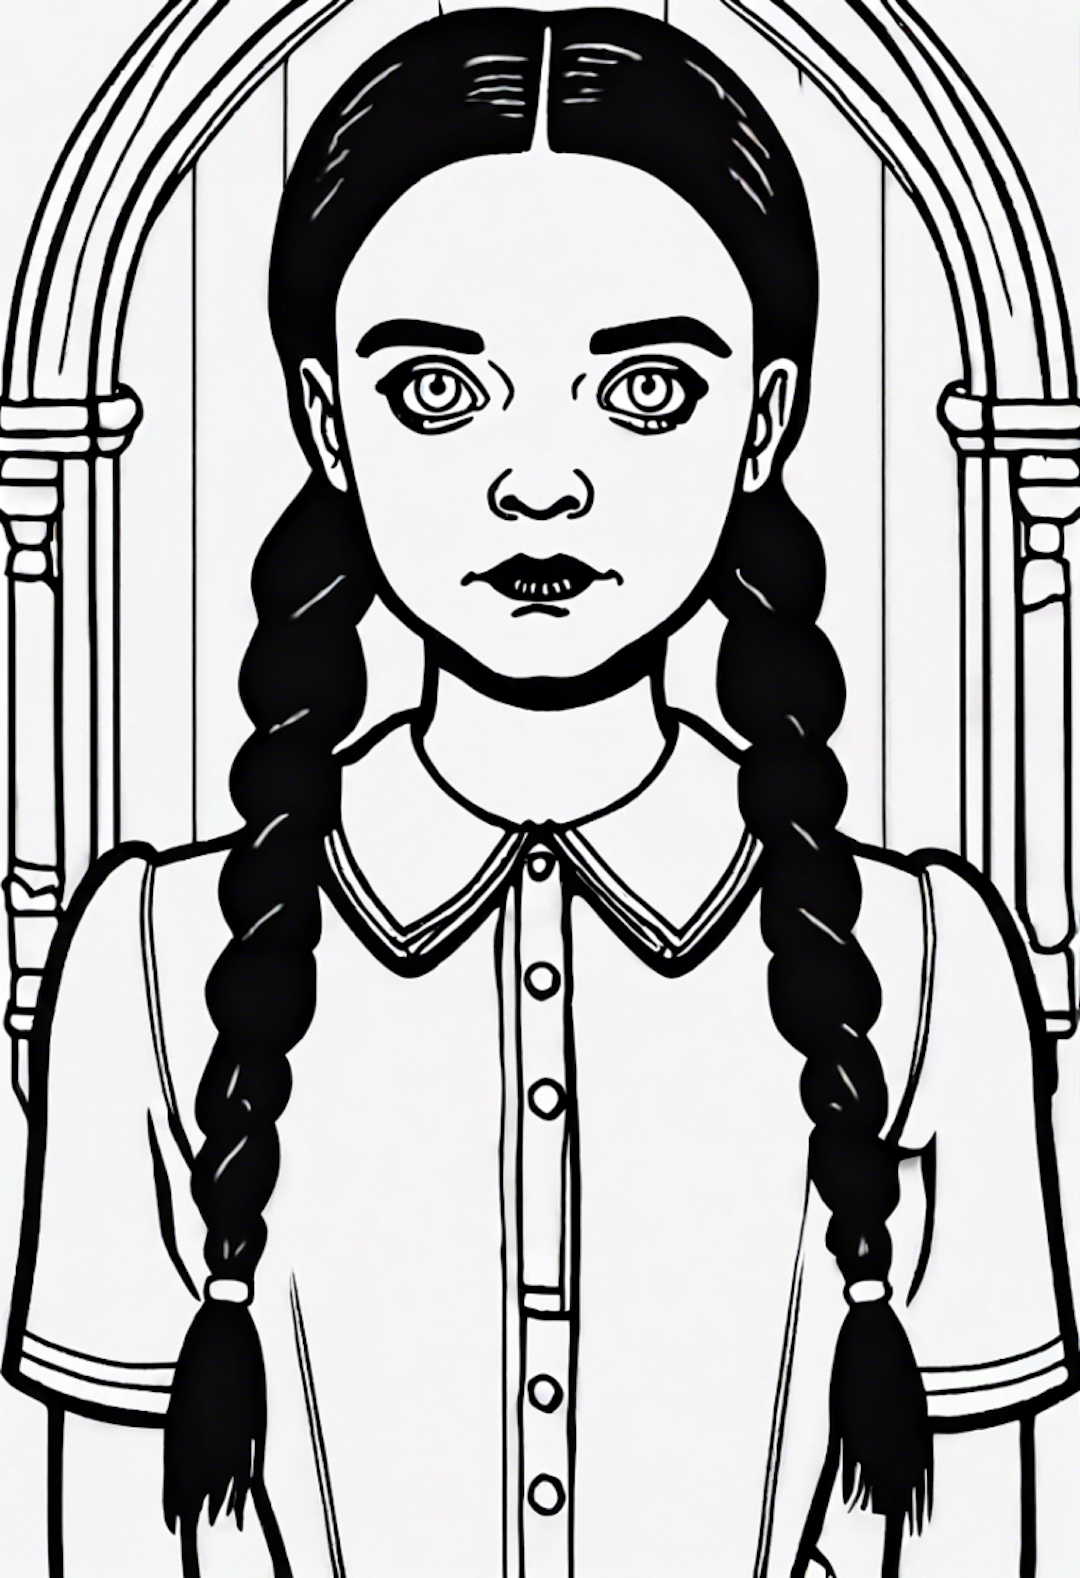 Wednesday Addams coloring pages